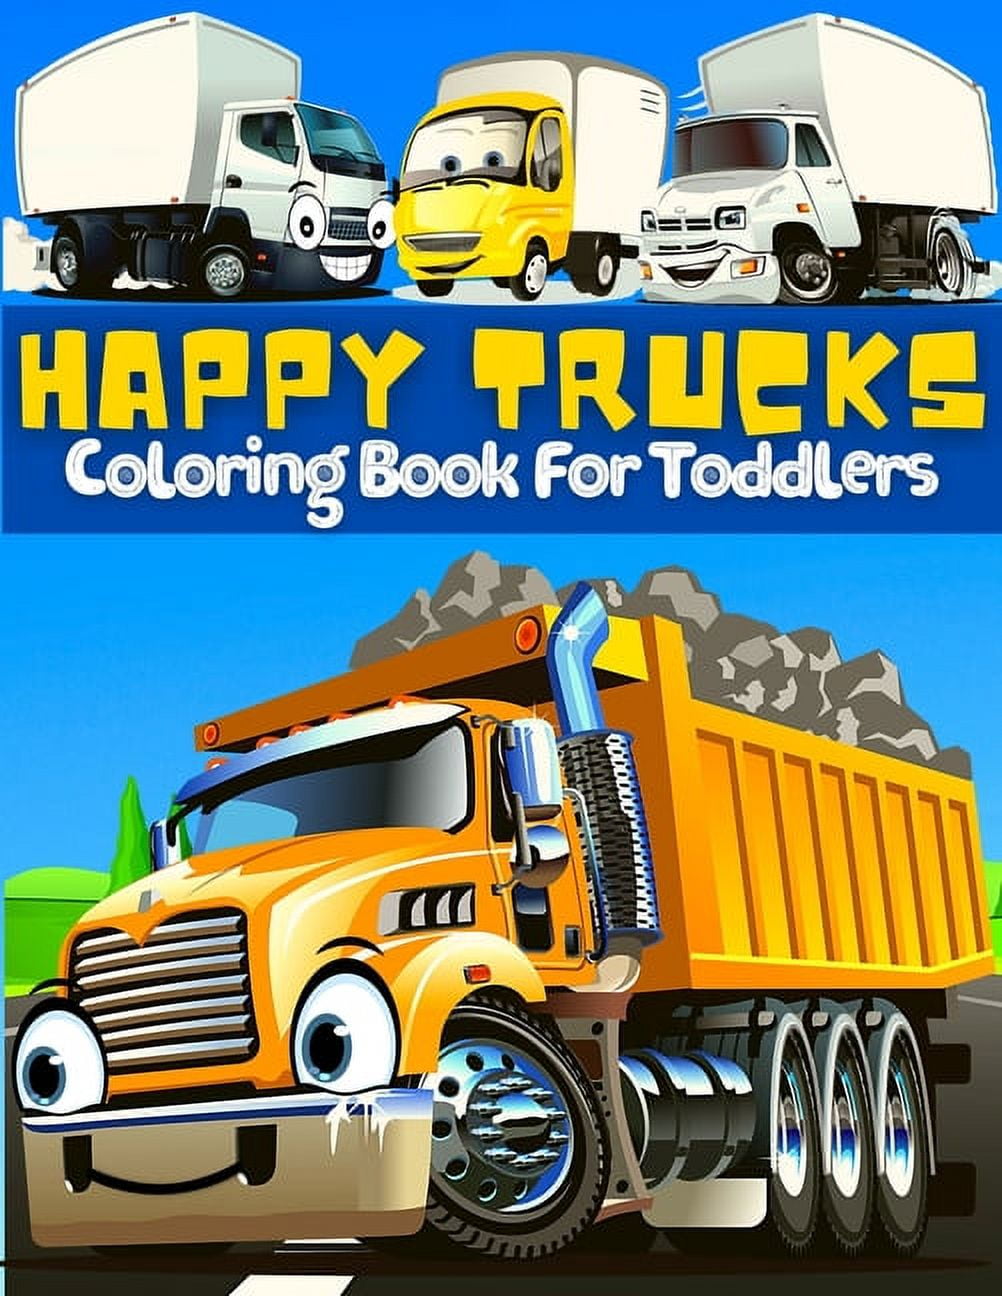 Cars and Trucks and Things That Go Coloring Book for Kids: Art Supplies for  Kids 4-8, 9-12 – Childrens Bookstore